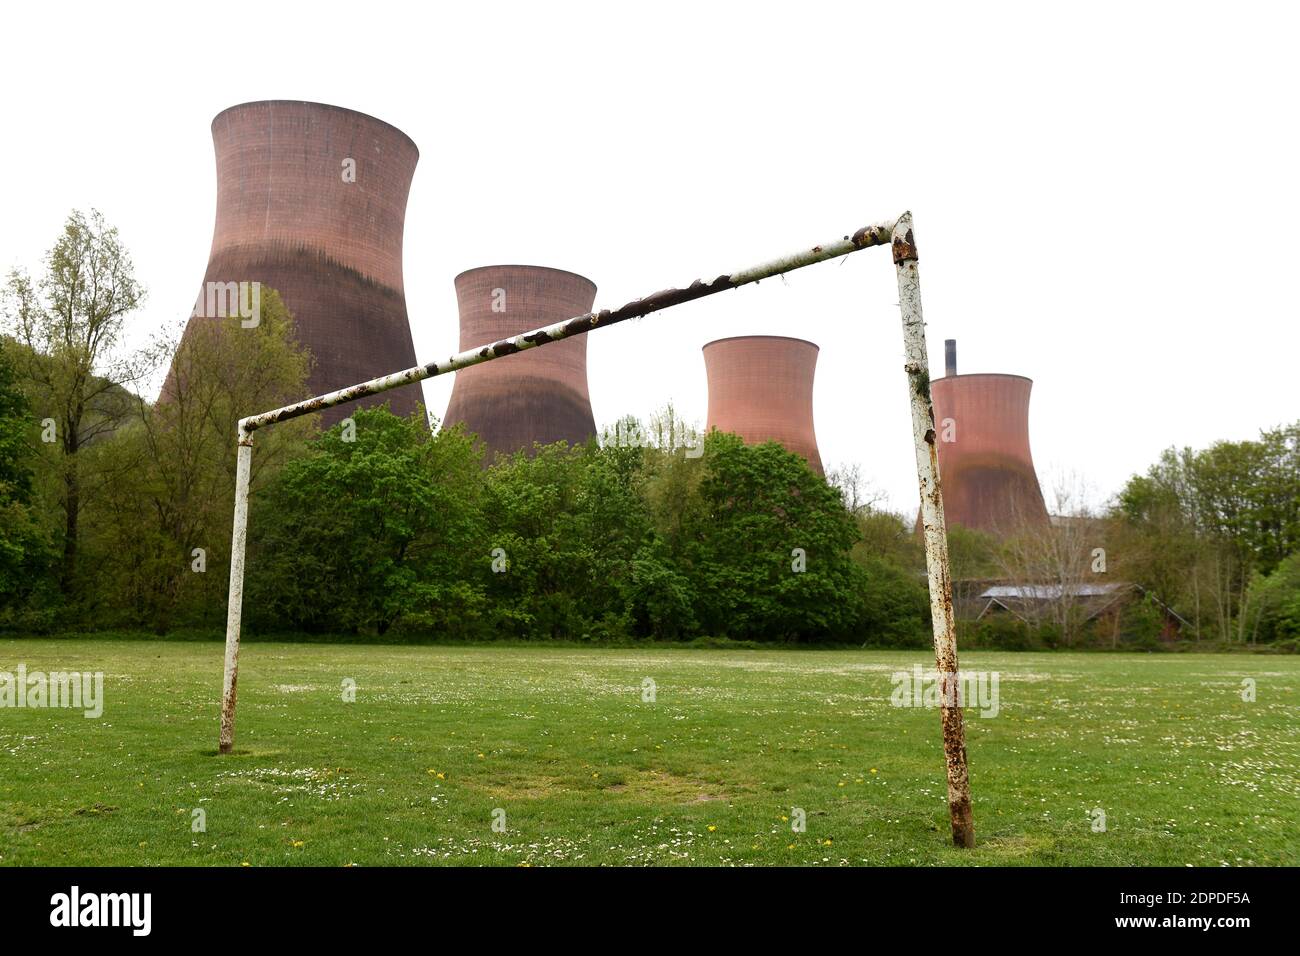 Rusty football goalposts in front of Ironbridge Power Station cooling towers Britain 2019 ONE OF A SERIES OF IMAGES BY DAVE BAGNALL PHOTOGRAPHY Stock Photo